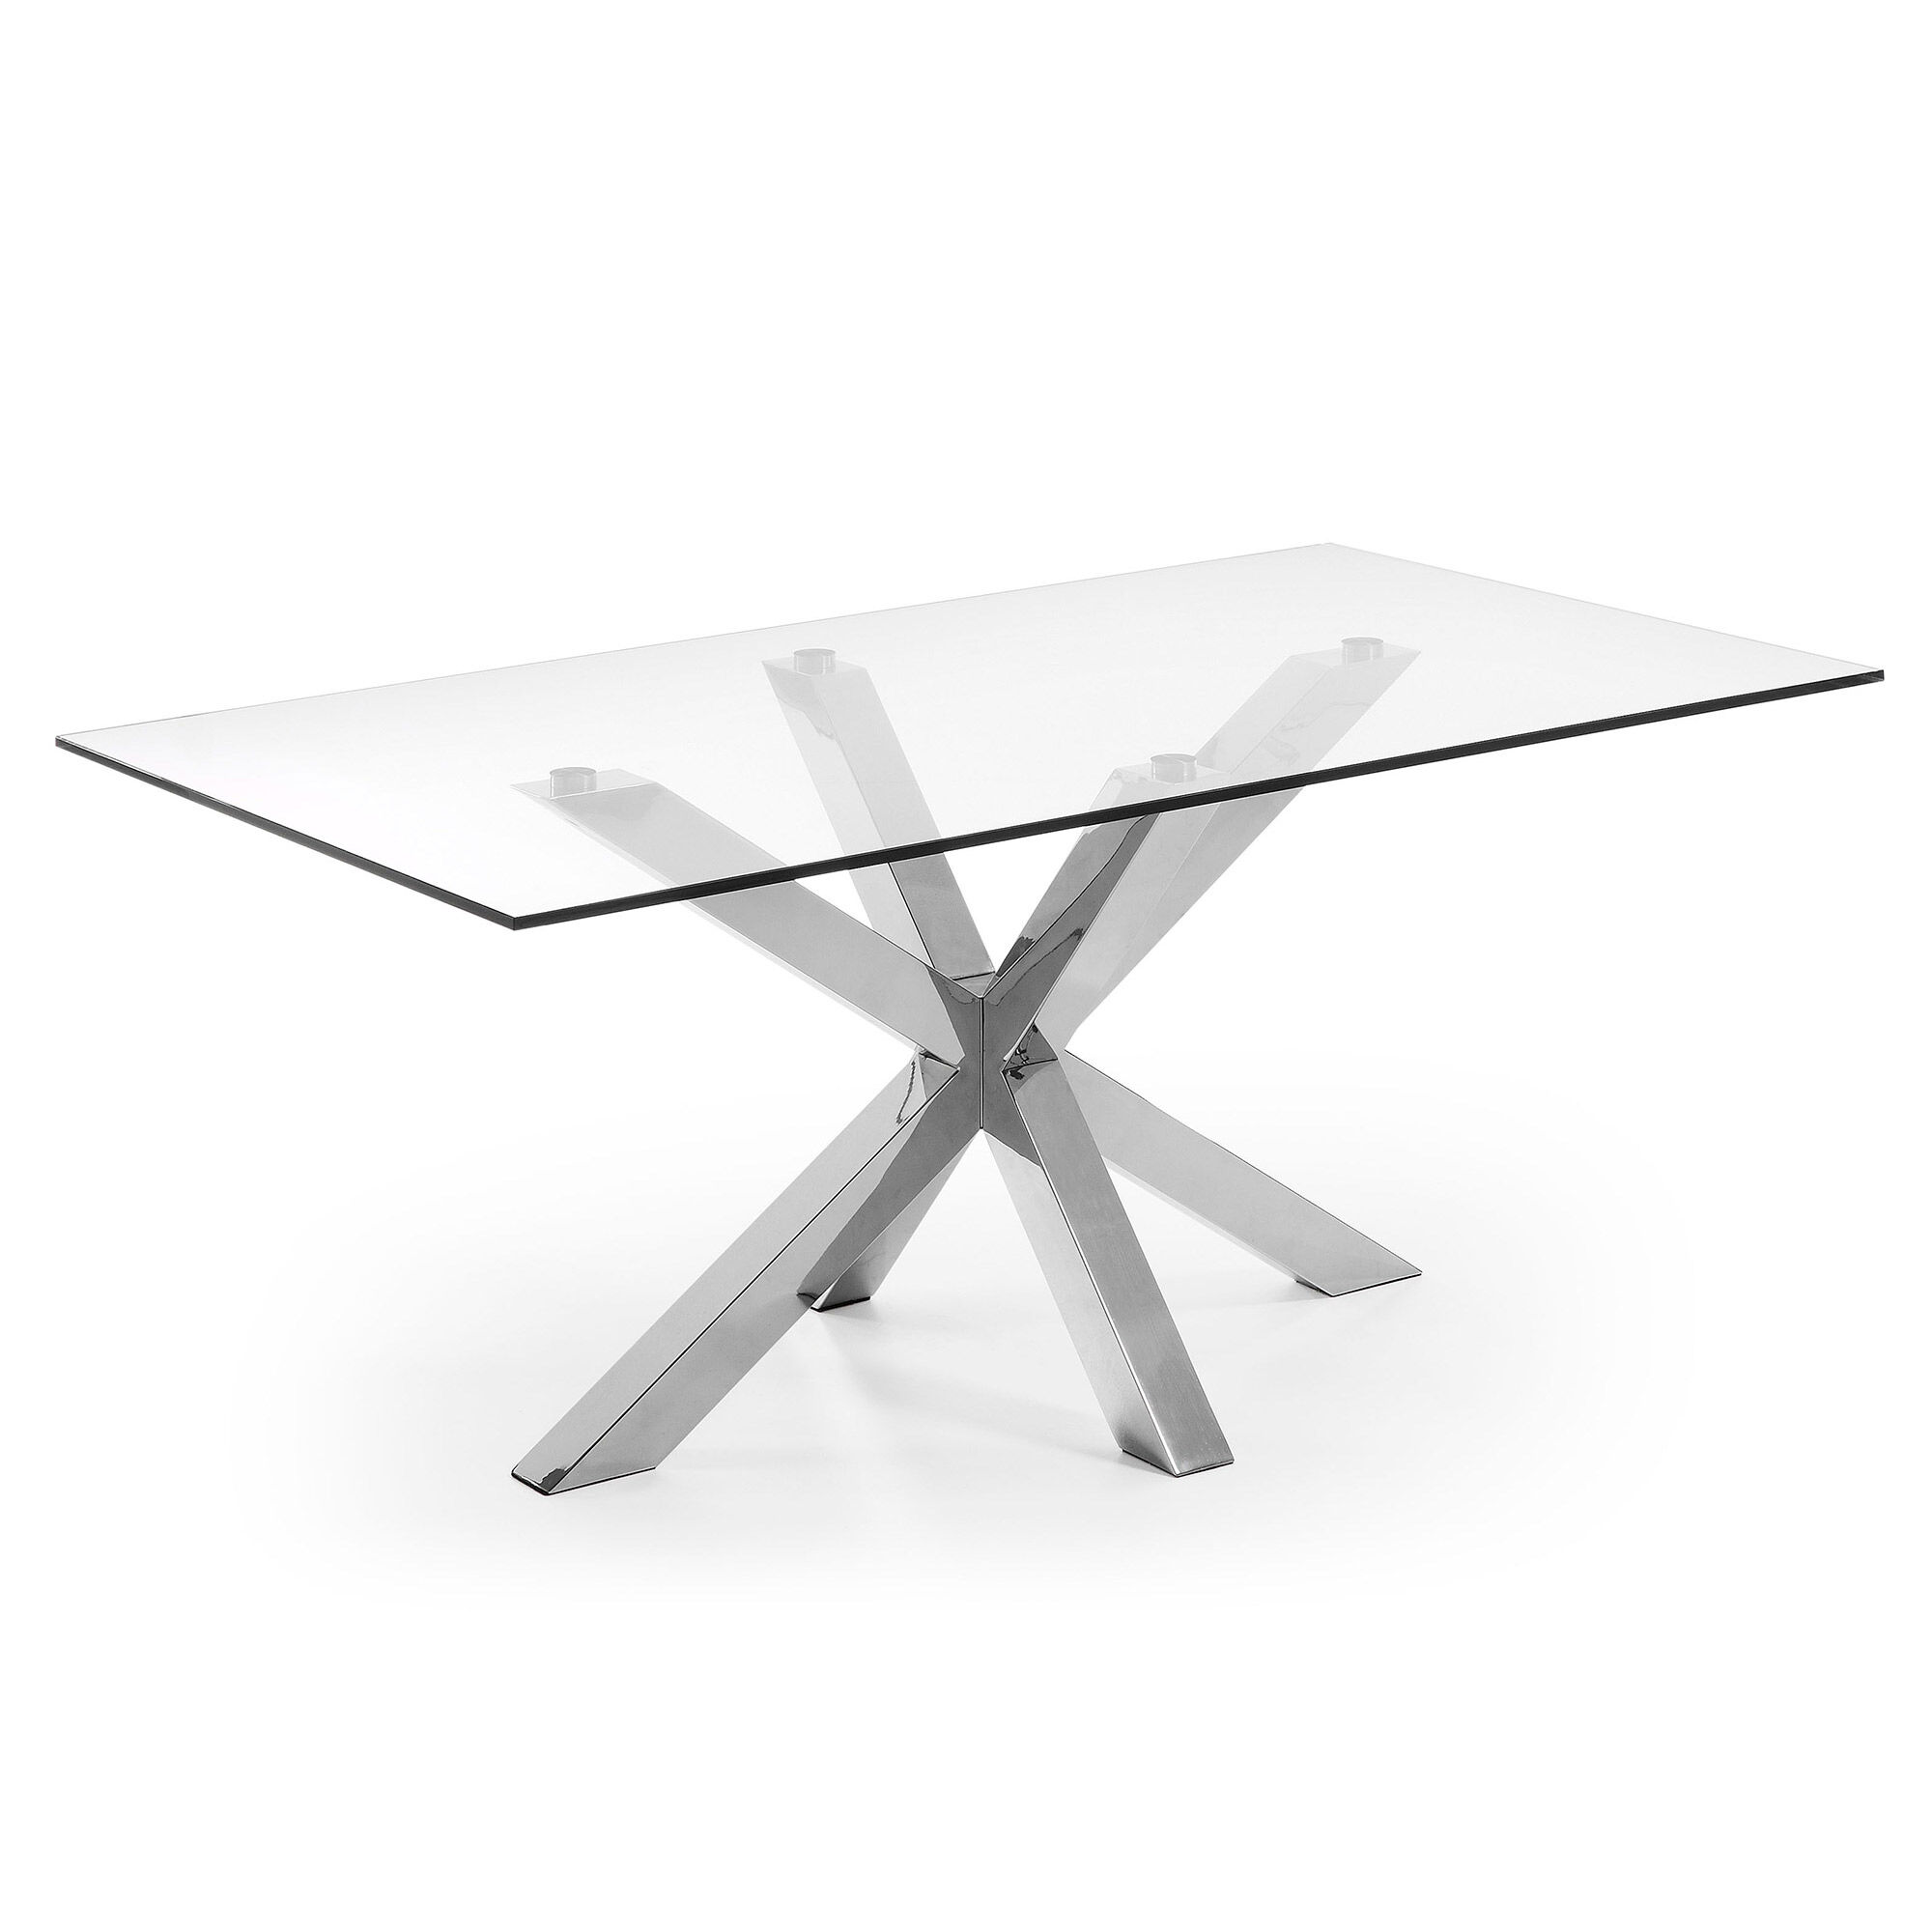 Kave Home Argo glass table with stainless steel legs 180 x 100 cm